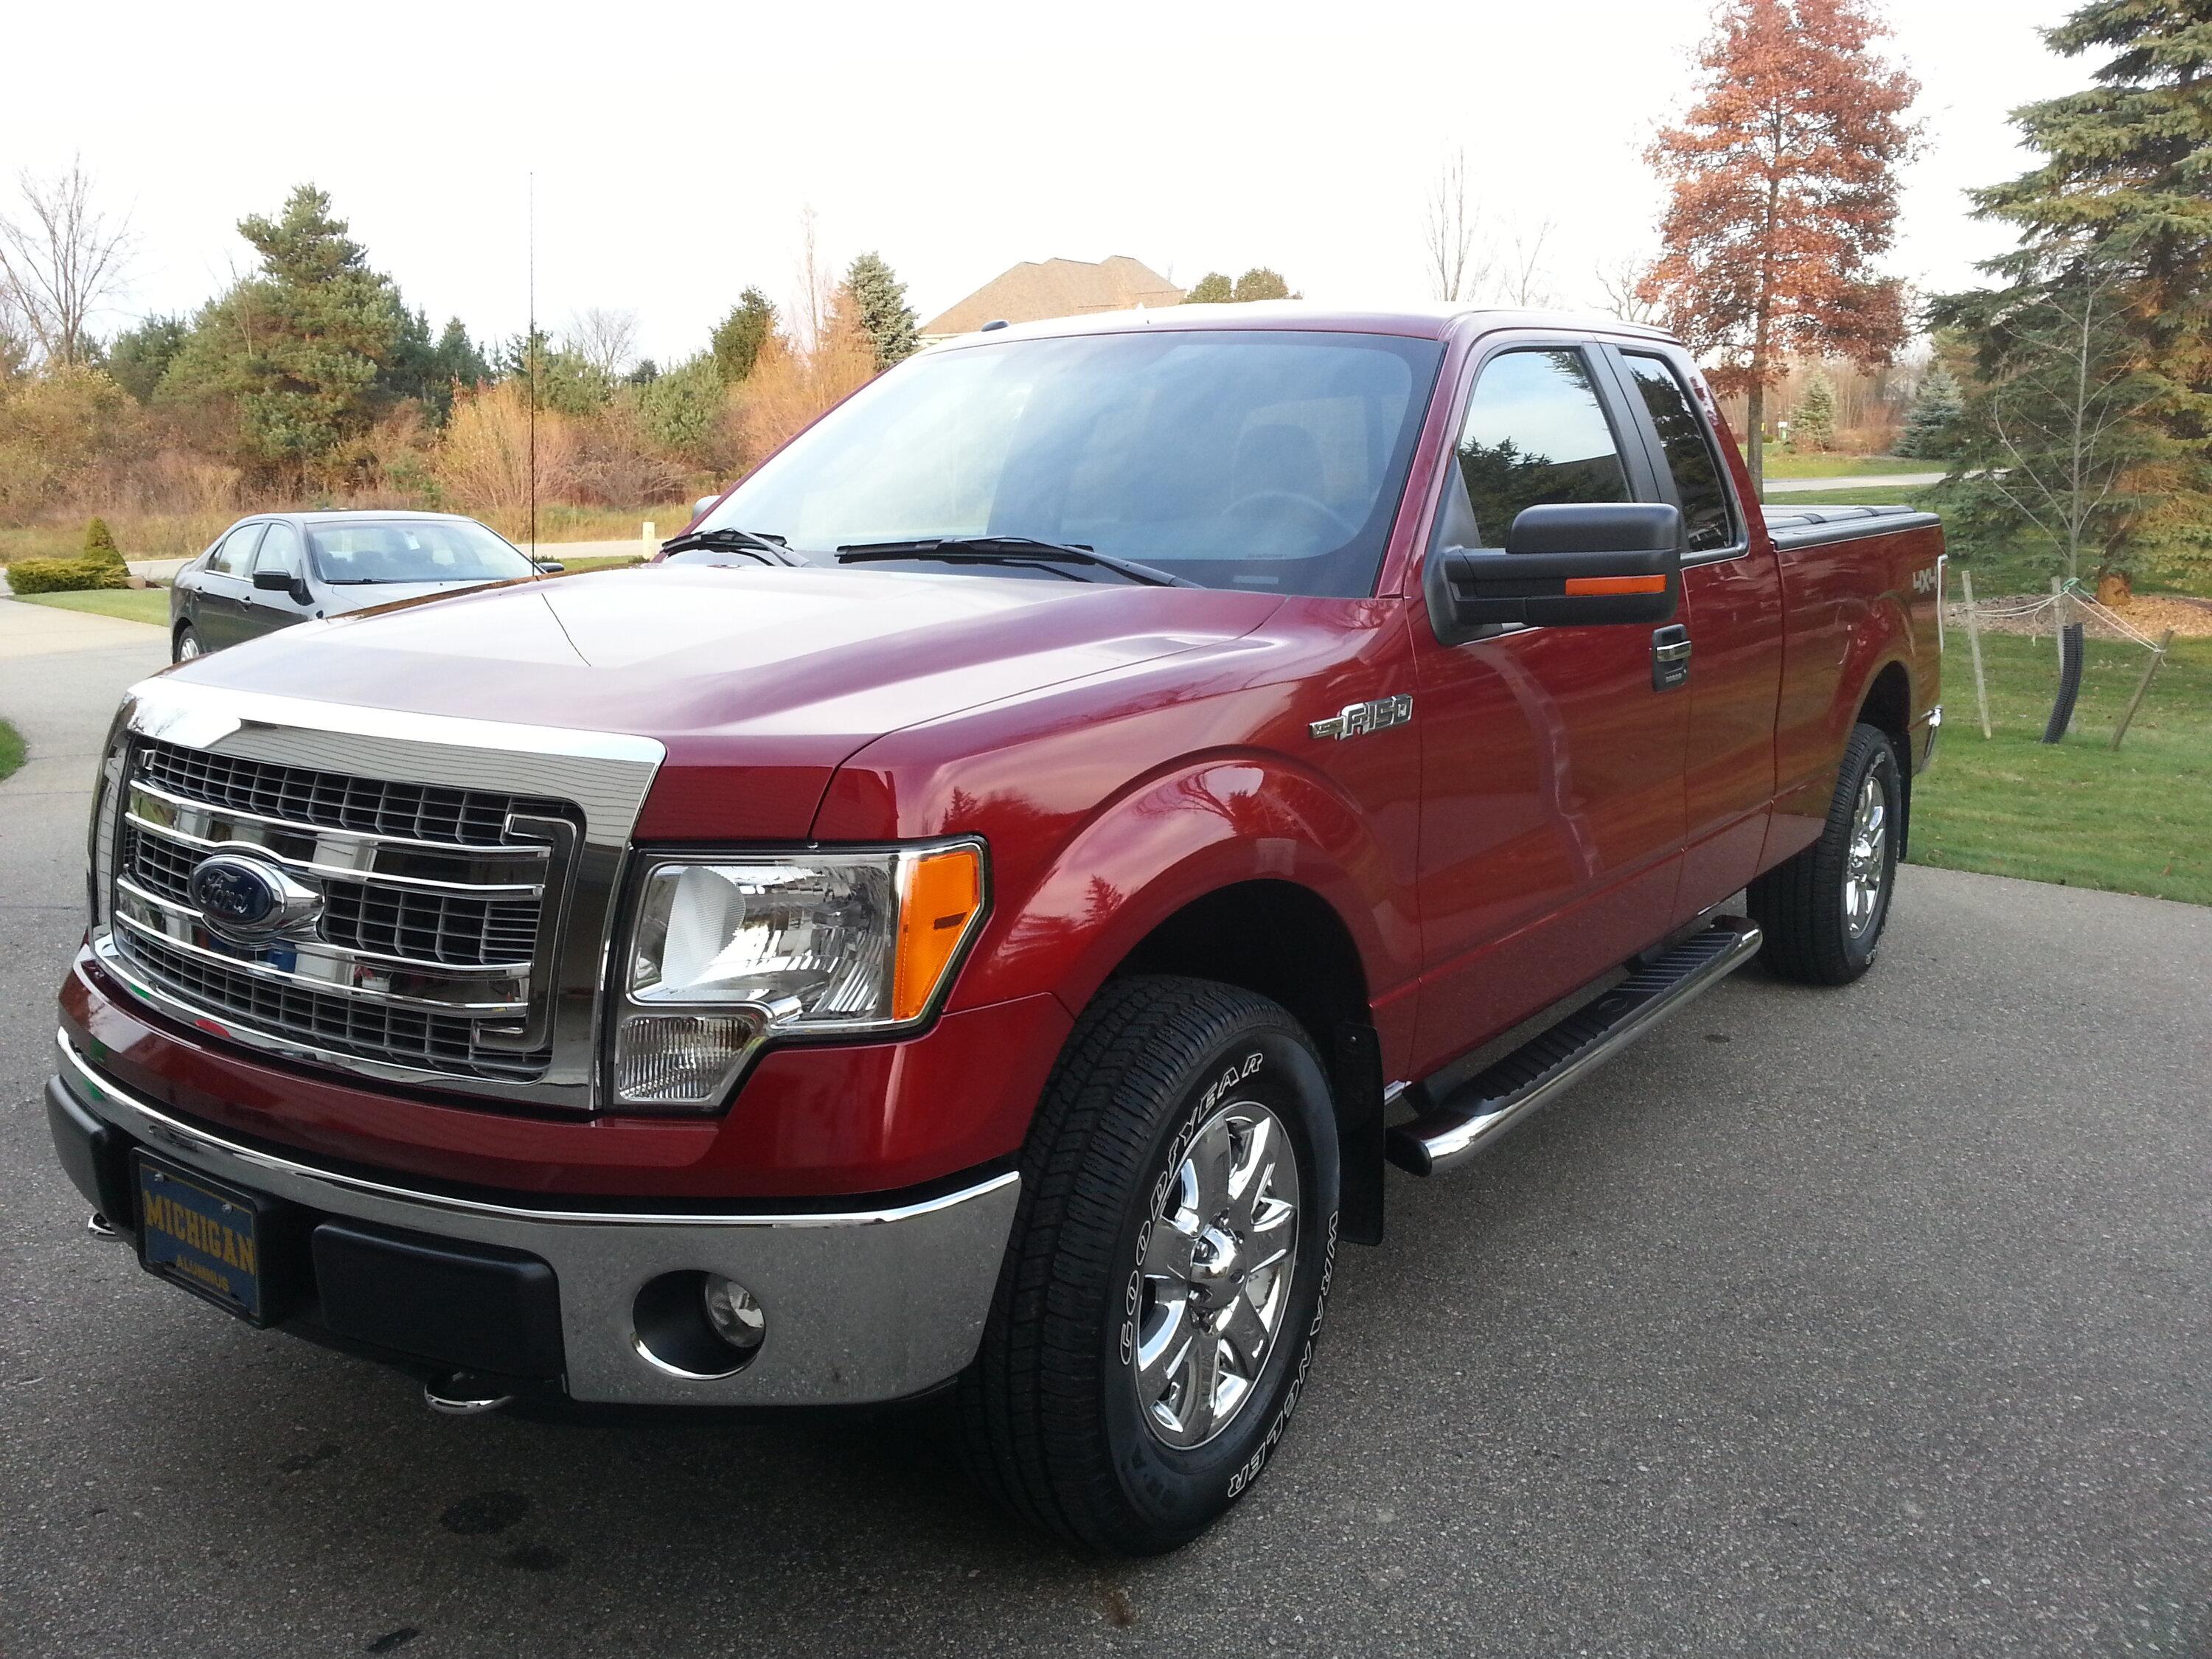 Ford F-150 Lightning Post a picture of your current vehicle 20141103_163643